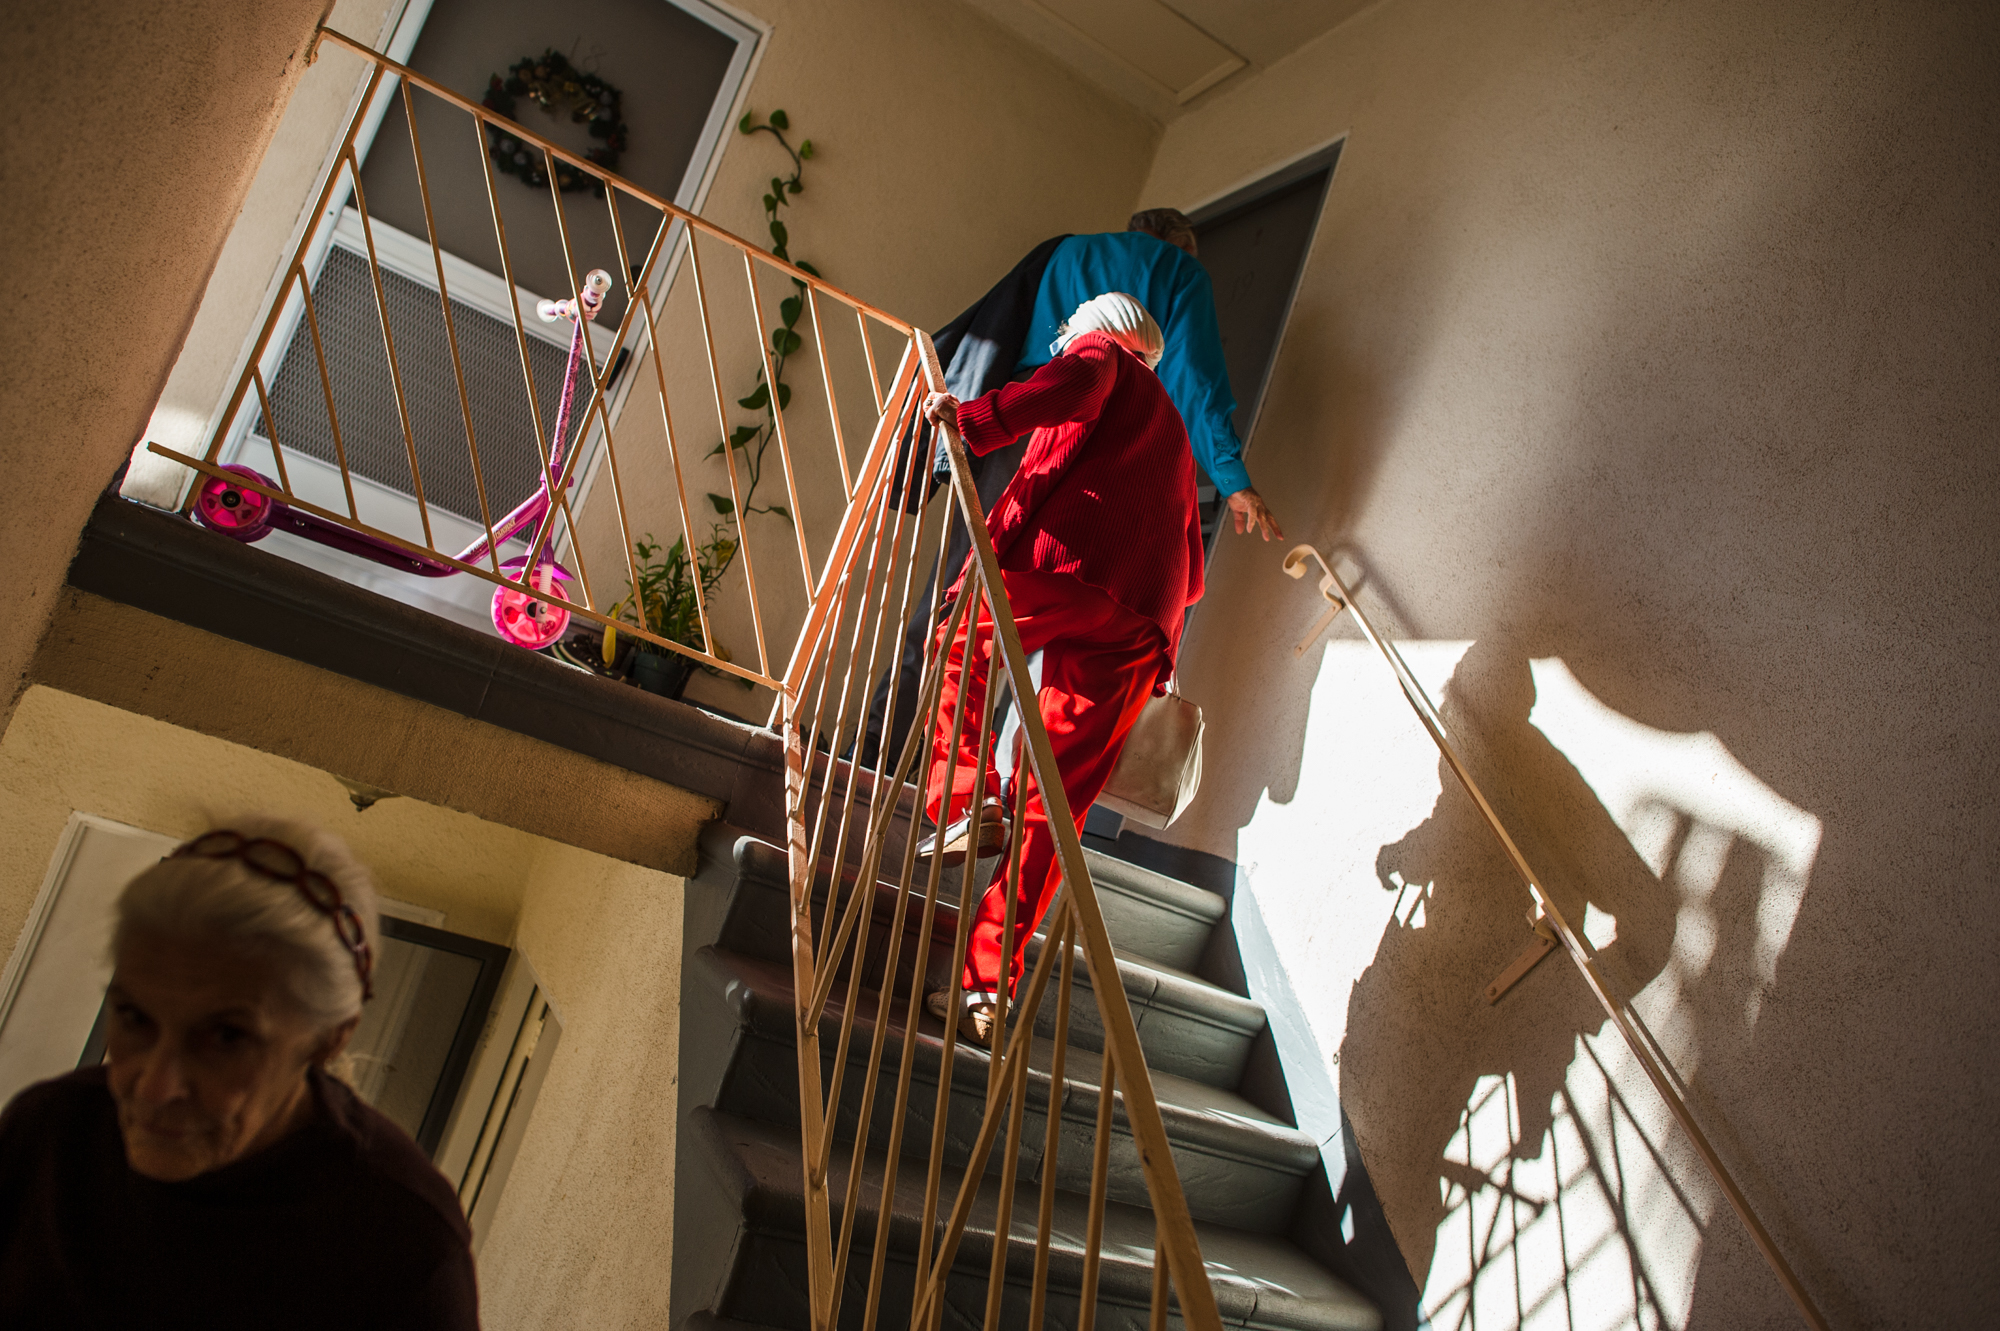  Adina, Will, and Jeanie climb a staircase to visit an apartment where they all may reside together.  